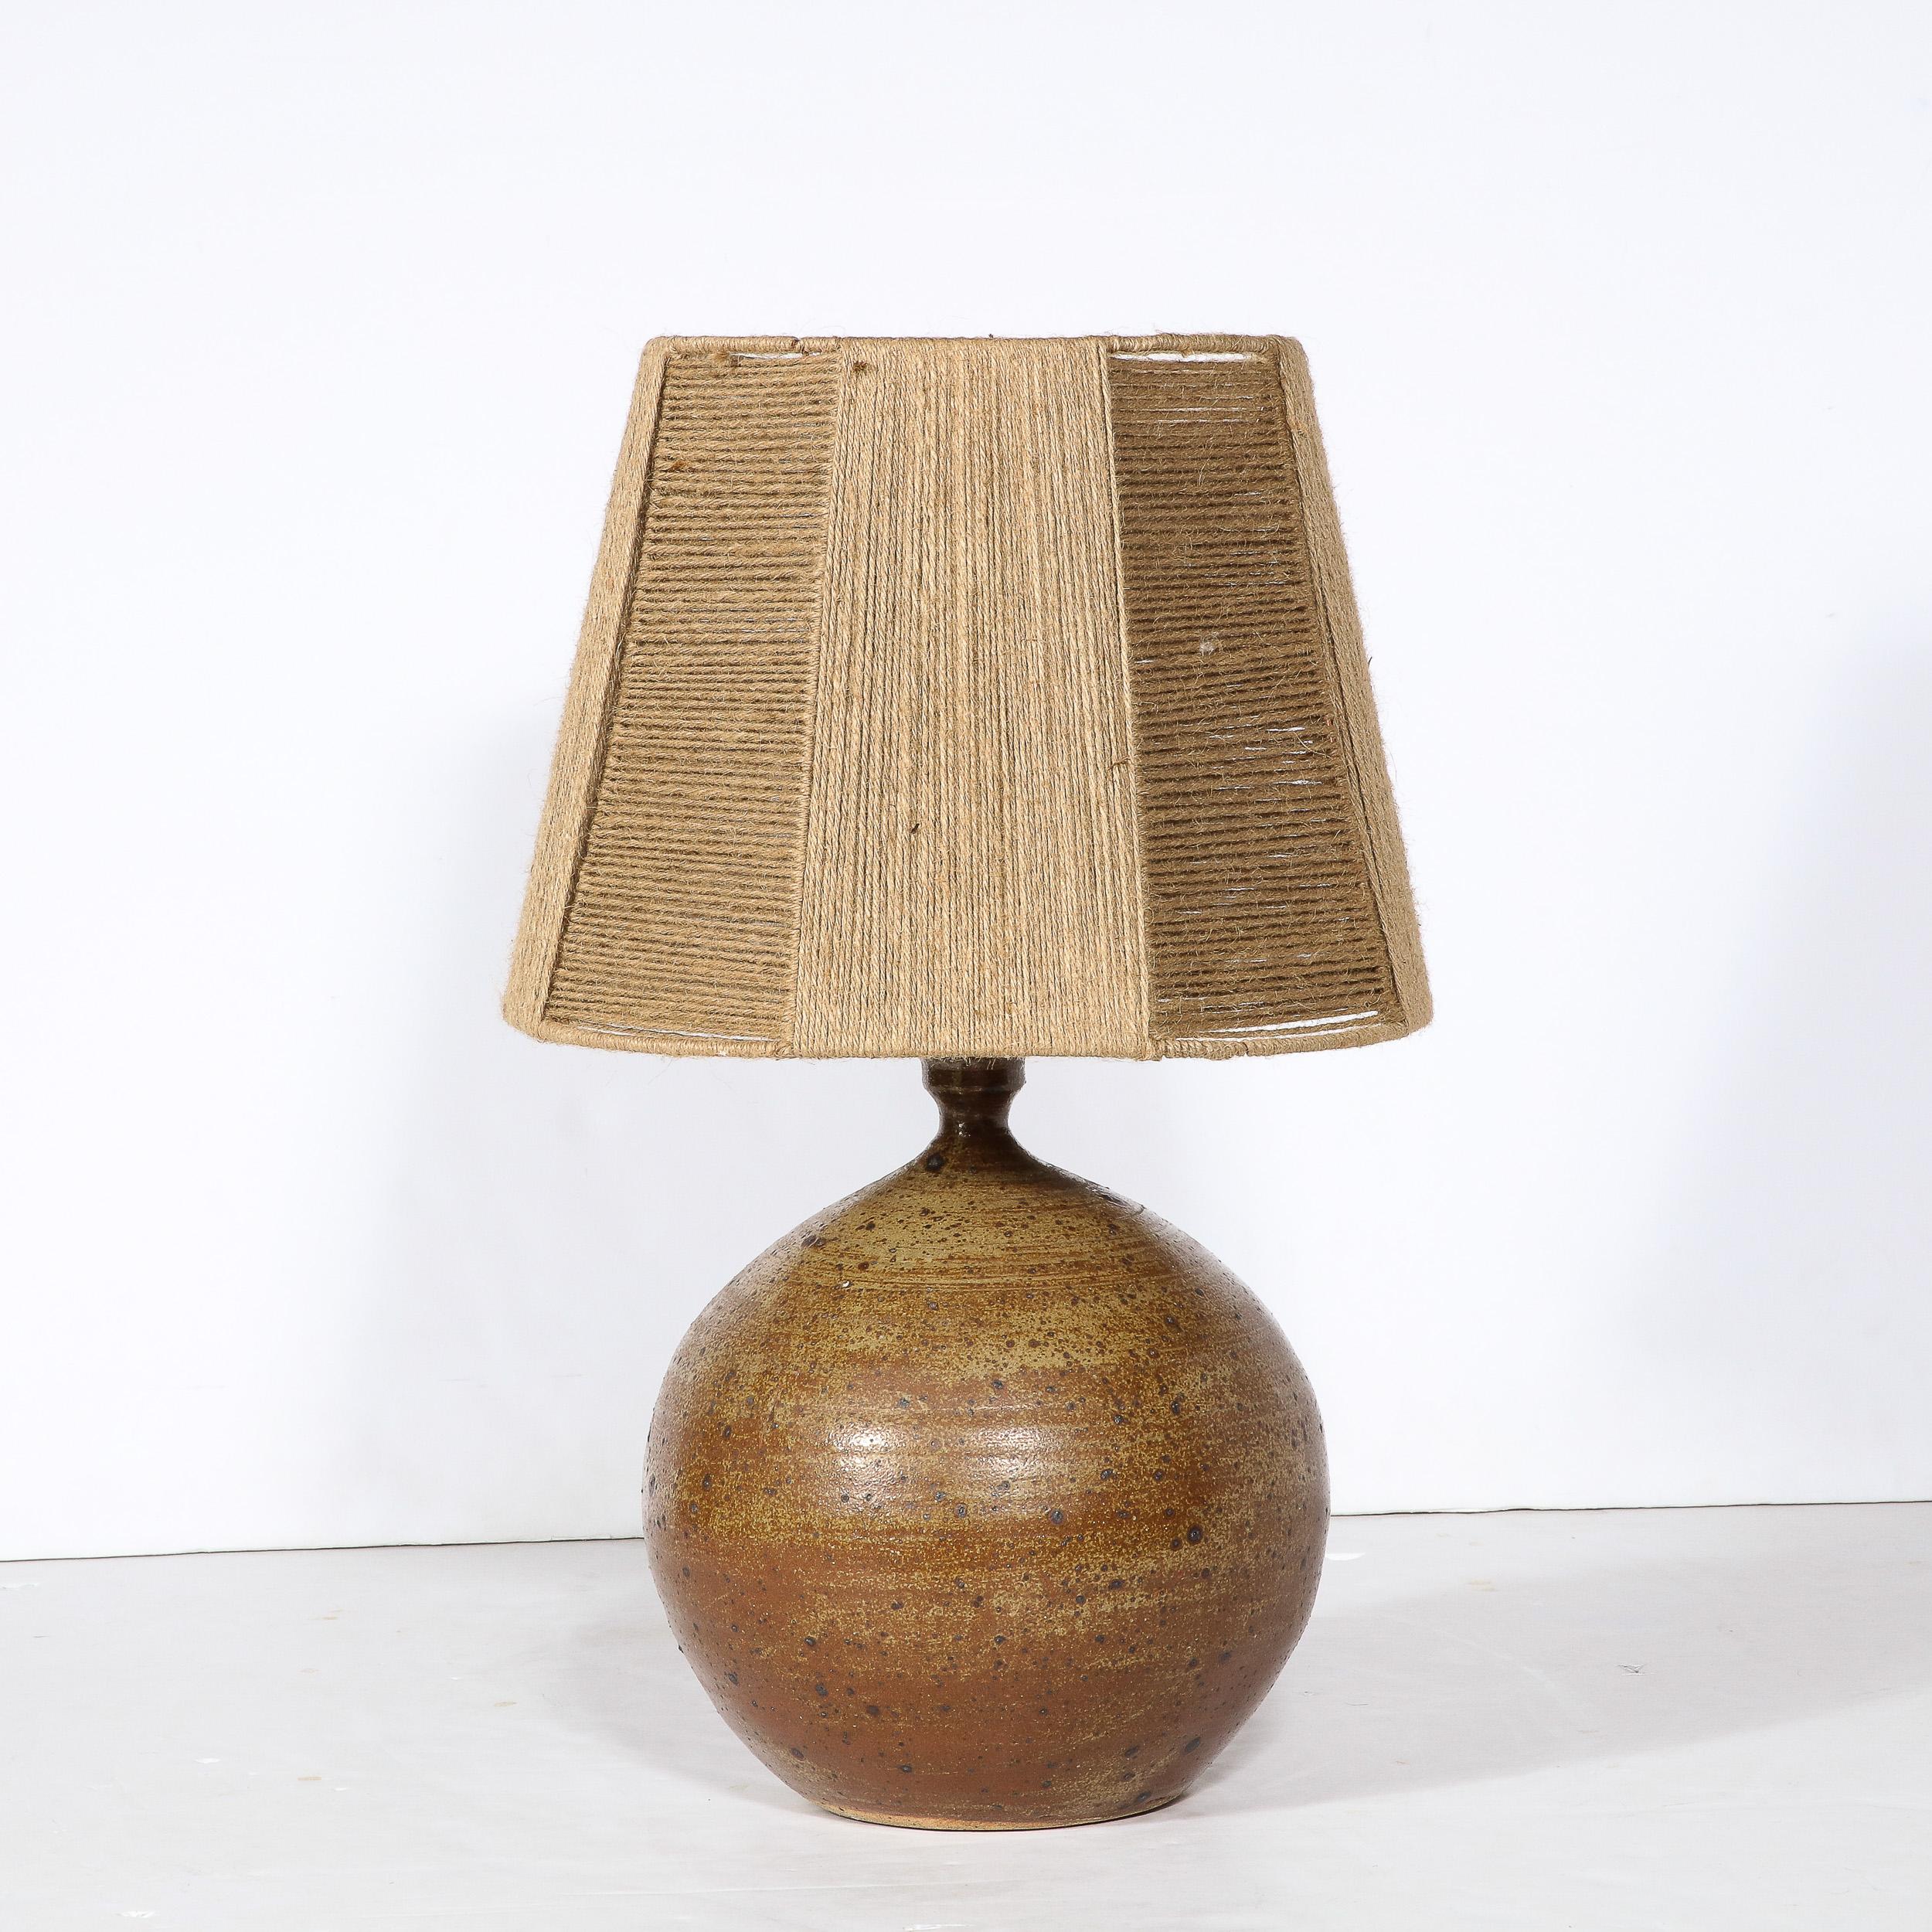 This beautiful and sophisticated Mid-Century Modern ceramic table lamp was realized in France circa 1960. It features a protuberant orbital body with a hand glazed skein in a sumptuous burnt umber hue with expressionistic splashes of dark espresso